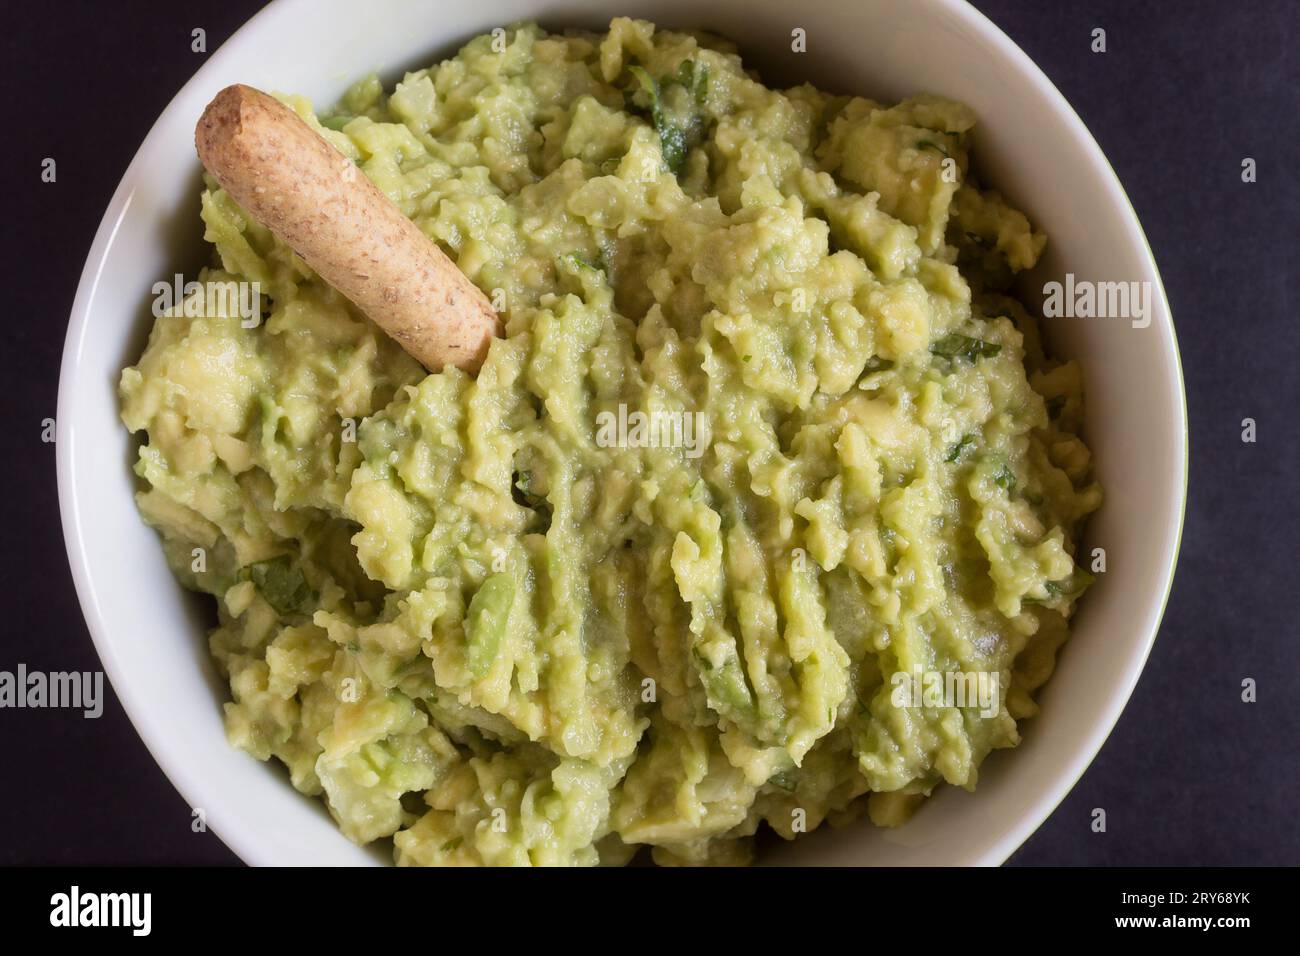 A macro shot of a delicious homemade guacamole dip in a round bowl, garnished with a crunchy whole grain breadstick. Traditional food Stock Photo